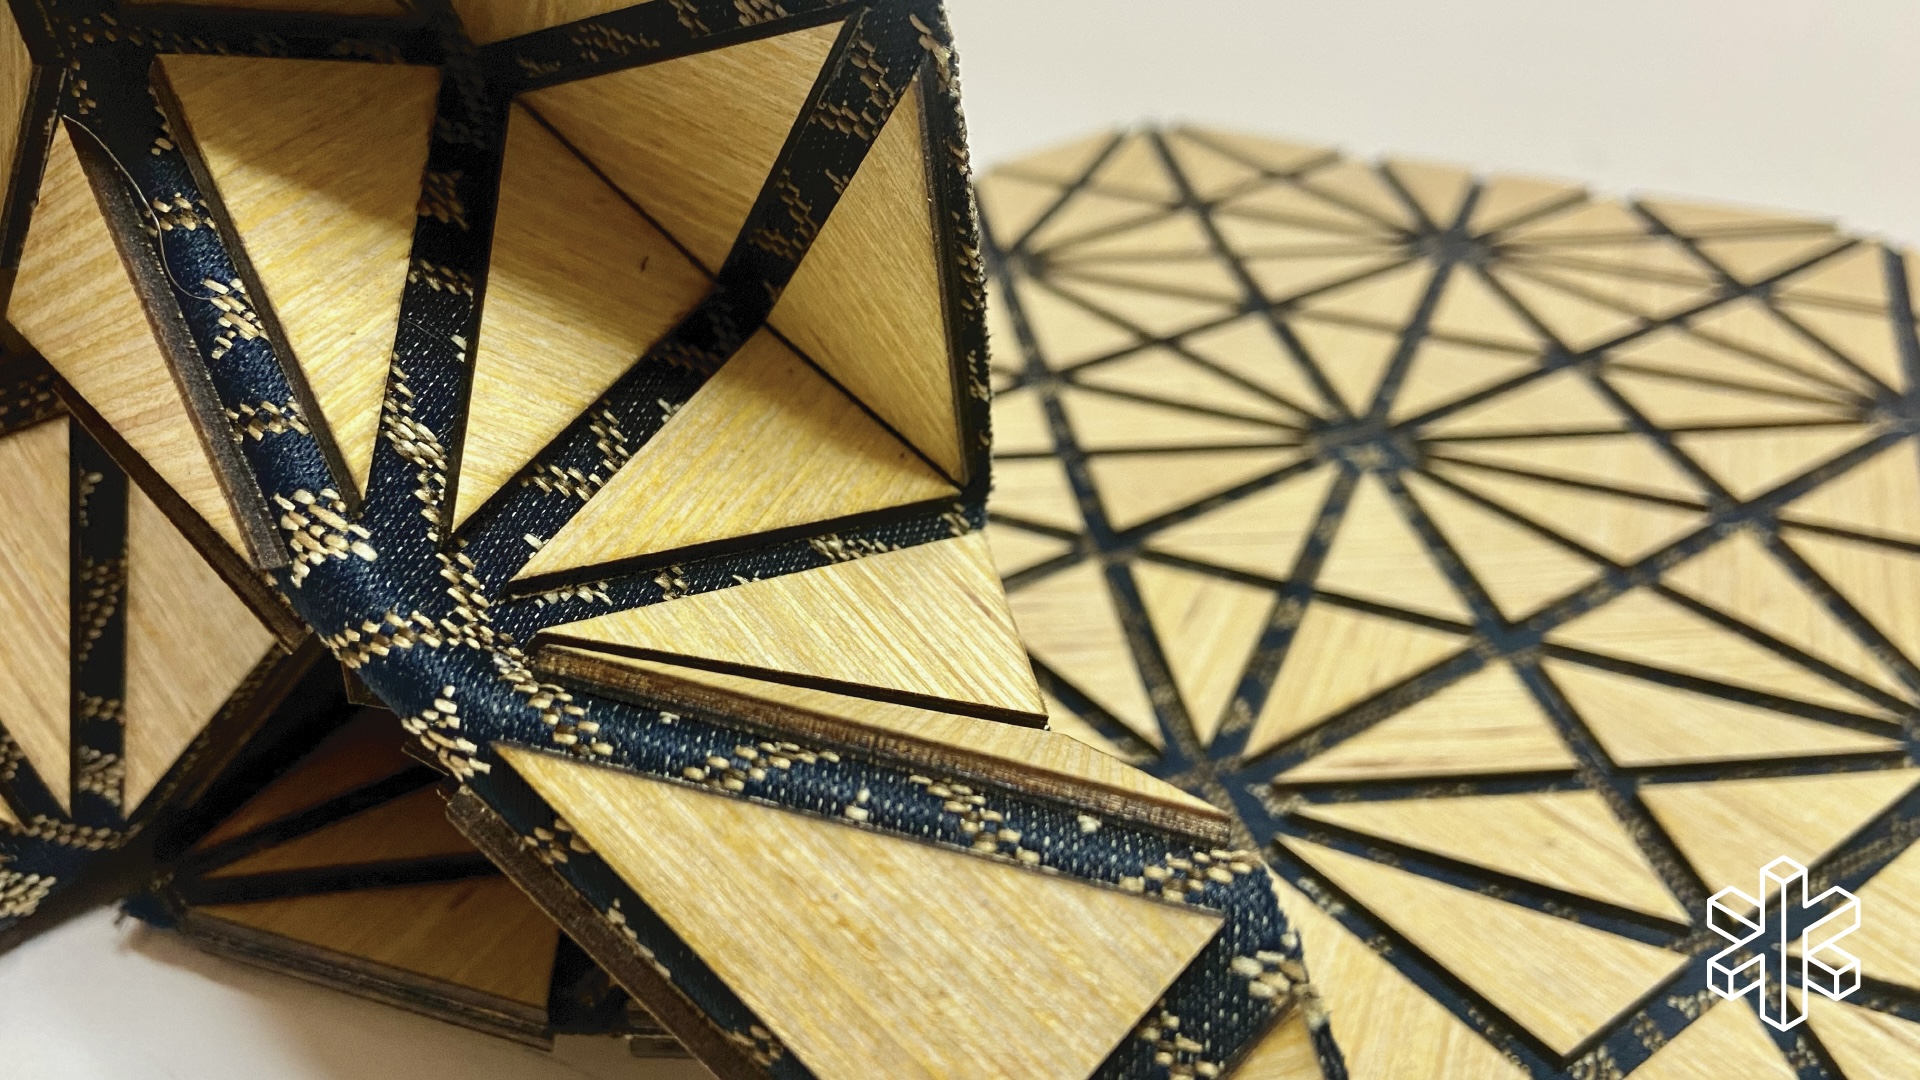 Foldable trivet in triangle patterns in yellow and black